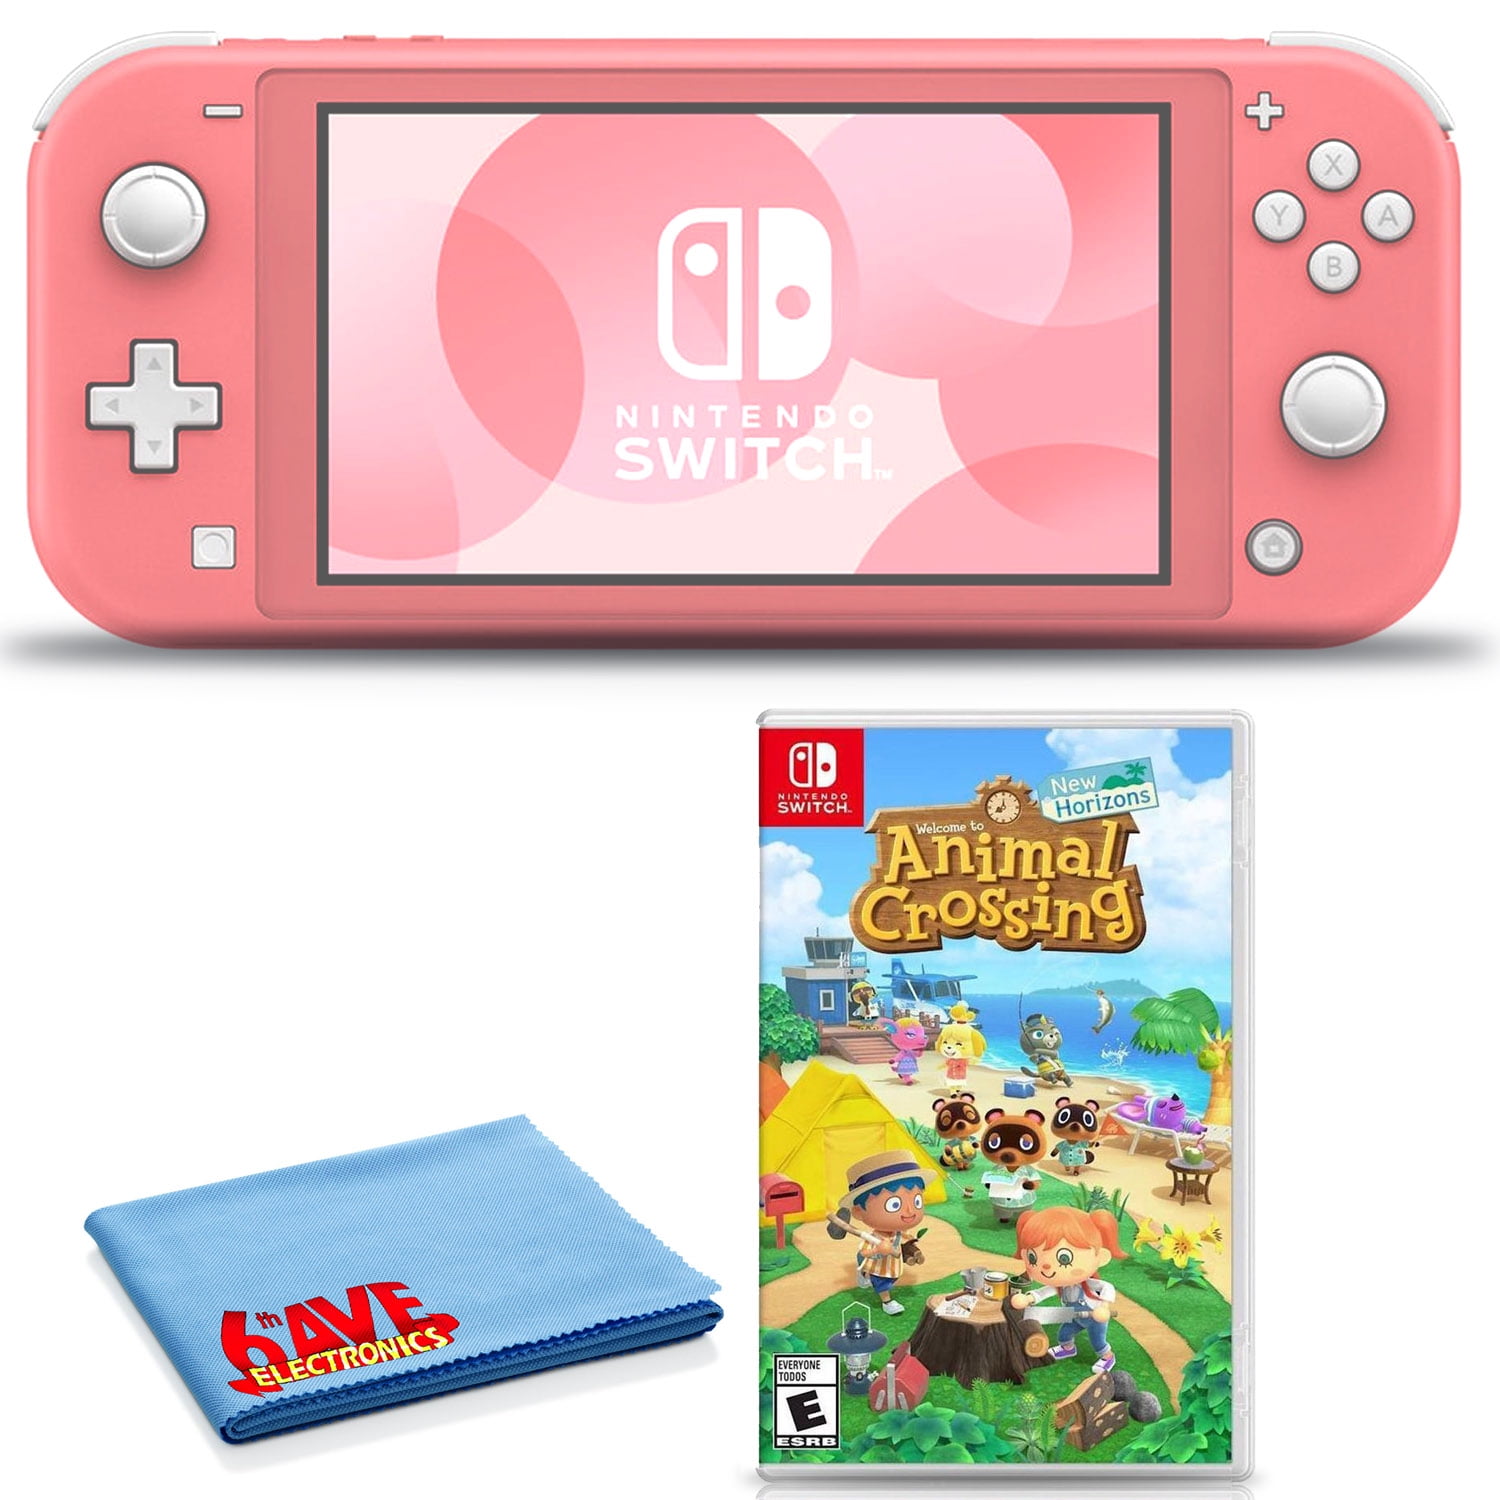 Nintendo Switch Lite (Coral) Bundle Includes Animal Crossing: New Horizons 